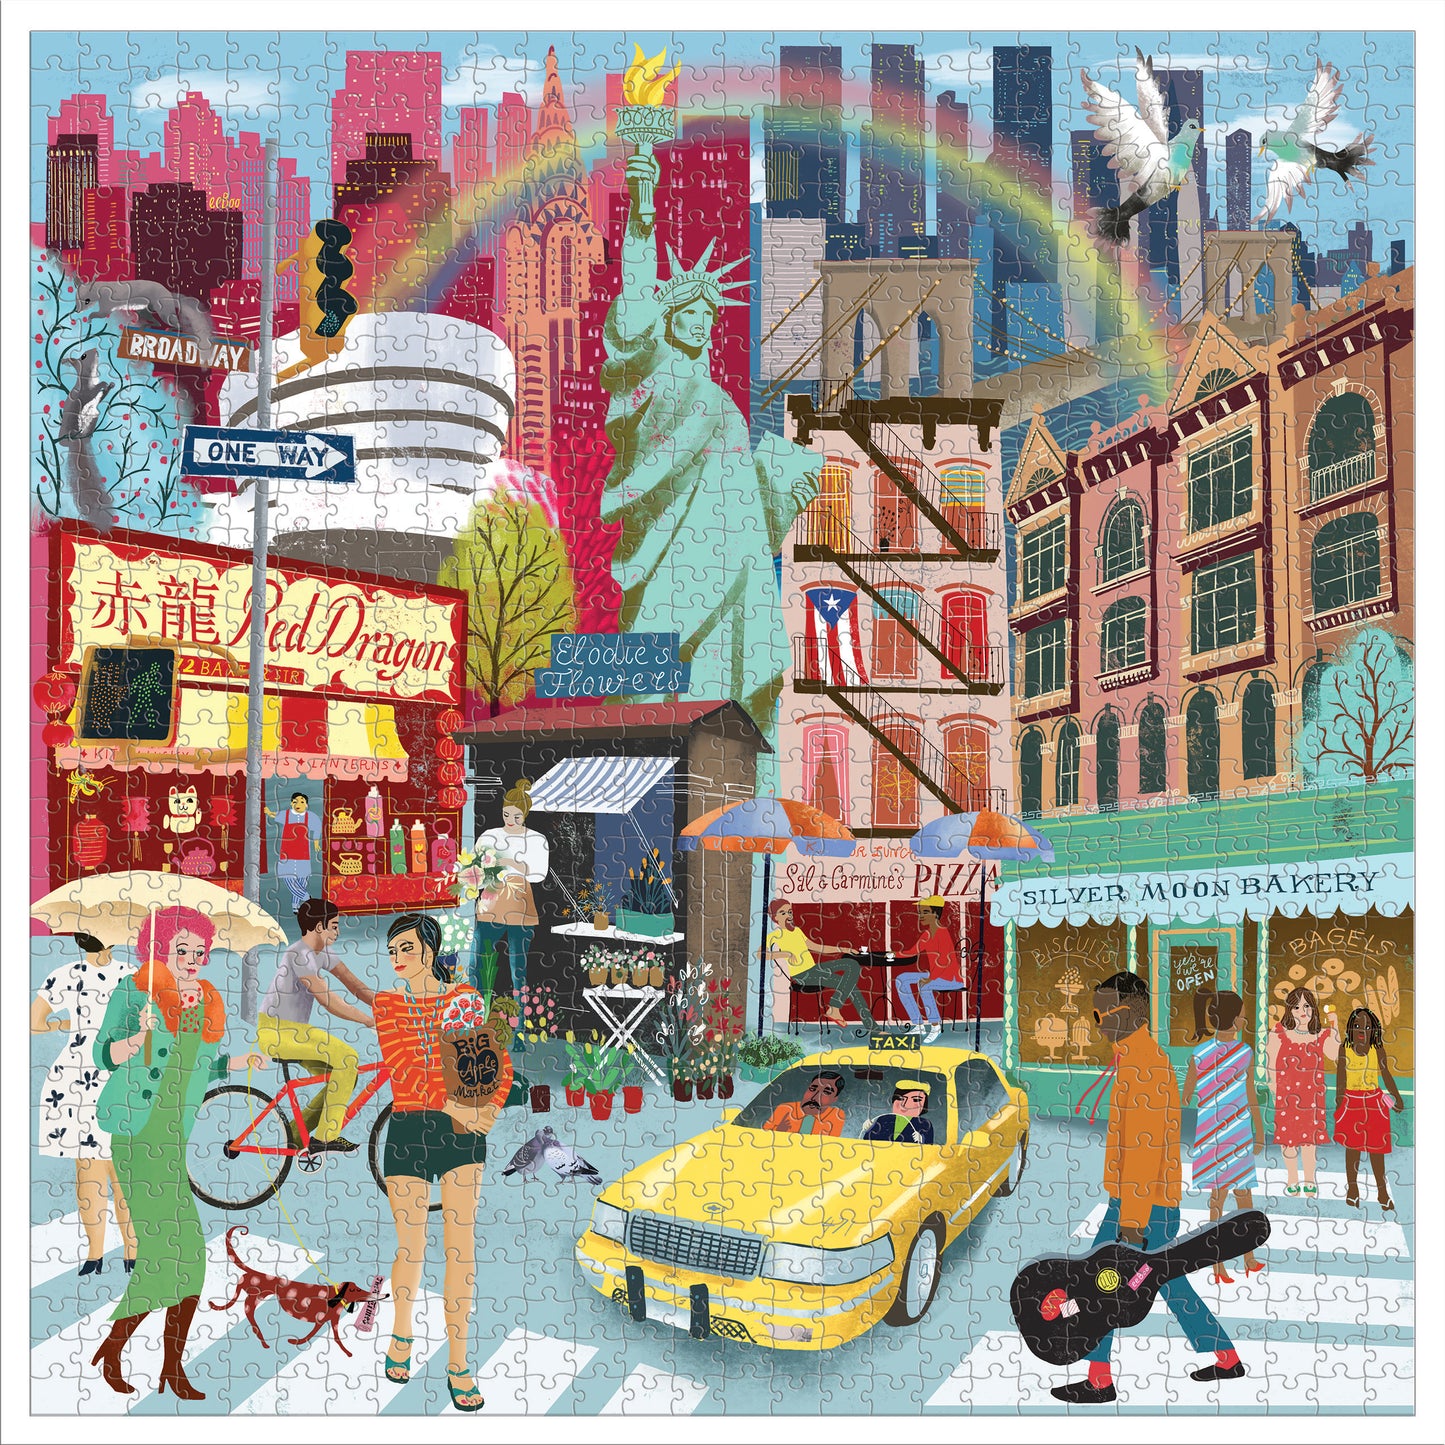 New York City Life 1000 Piece Travel Jigsaw Puzzle | eeBoo Piece & Love | Gifts for Travel lovers